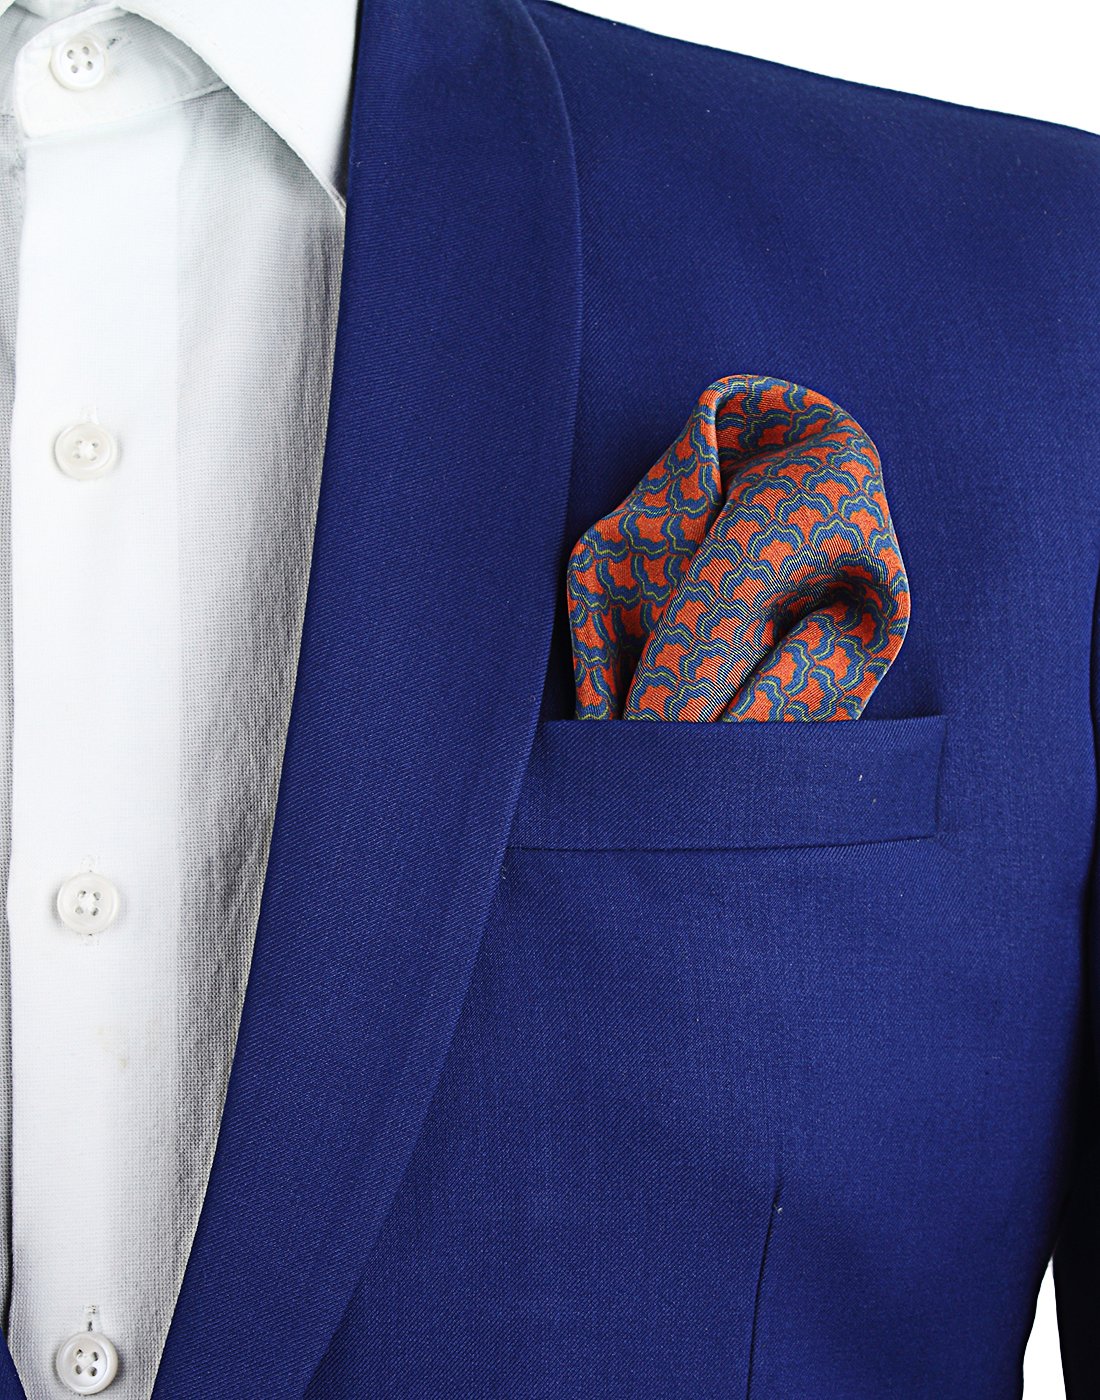 Chokore Blue and Red Silk Pocket Square - Indian At Heart line